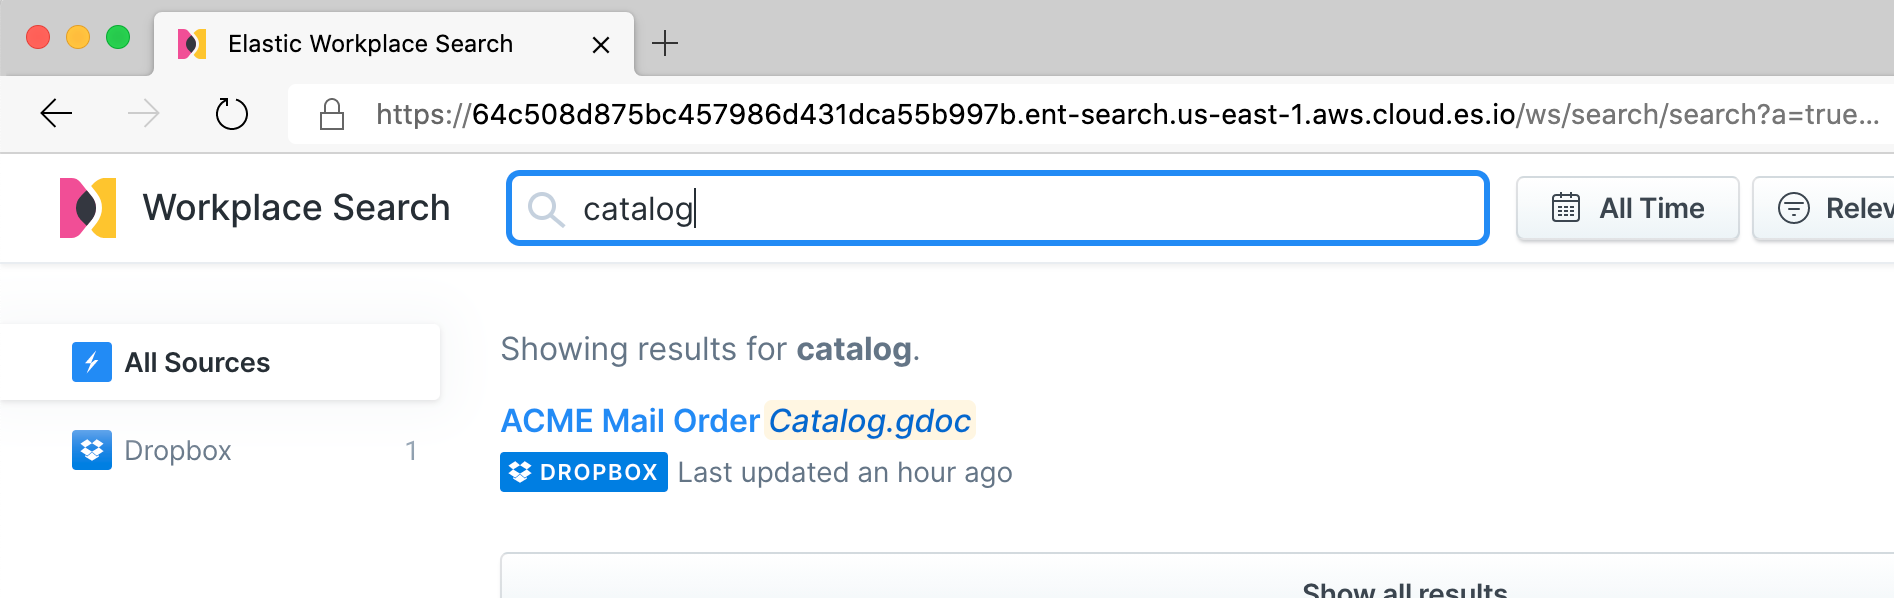 opensearch edge search results